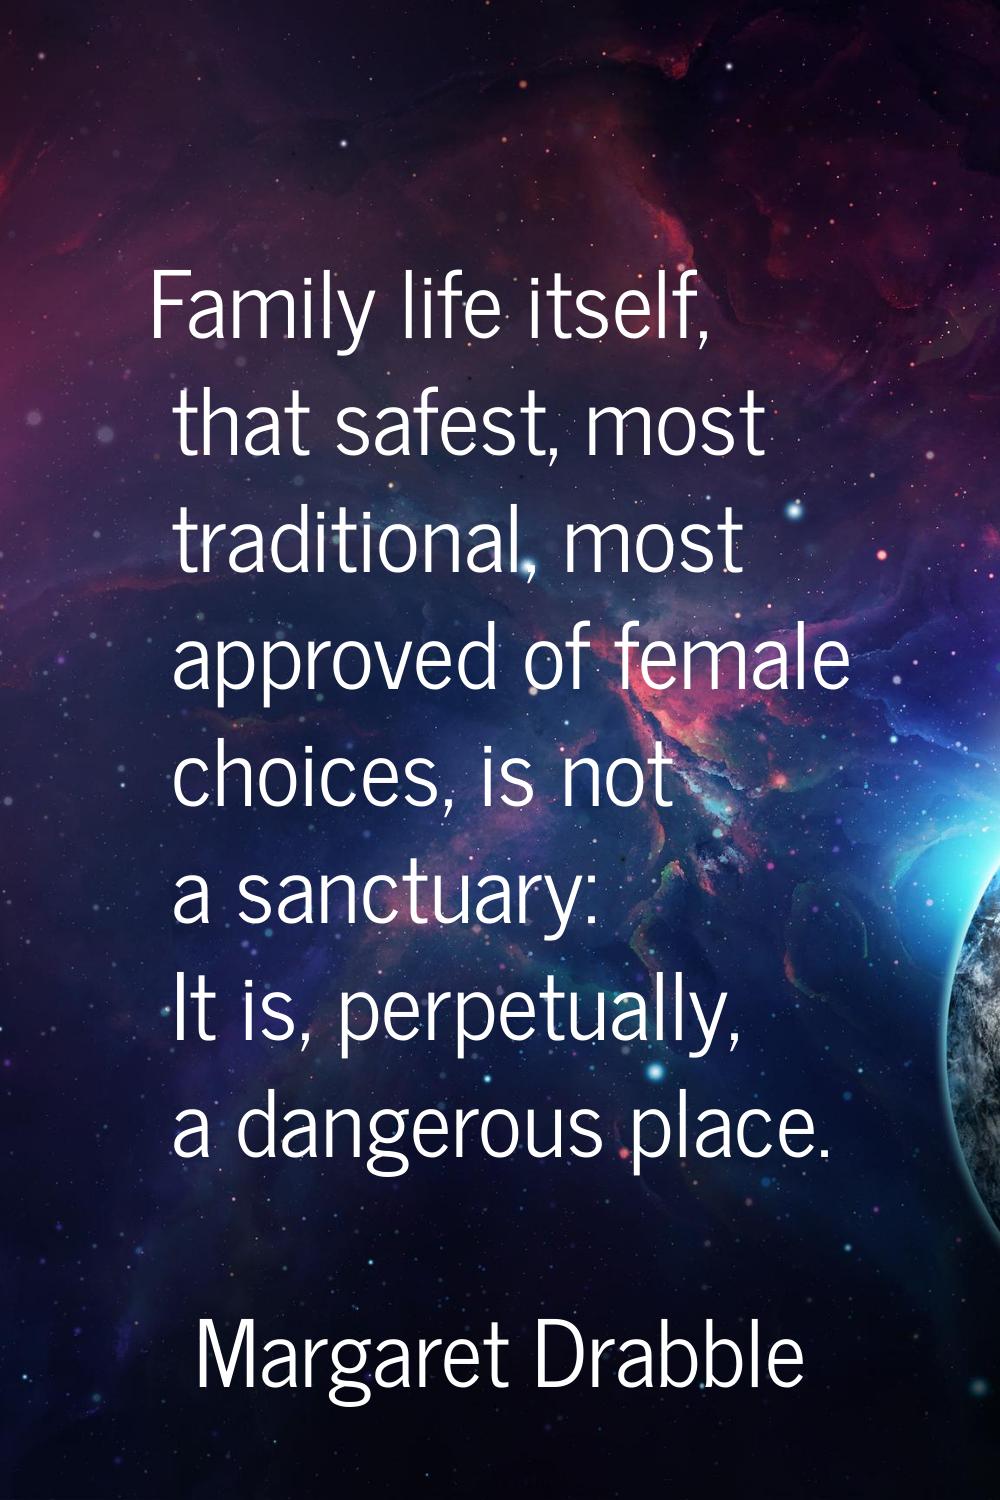 Family life itself, that safest, most traditional, most approved of female choices, is not a sanctu